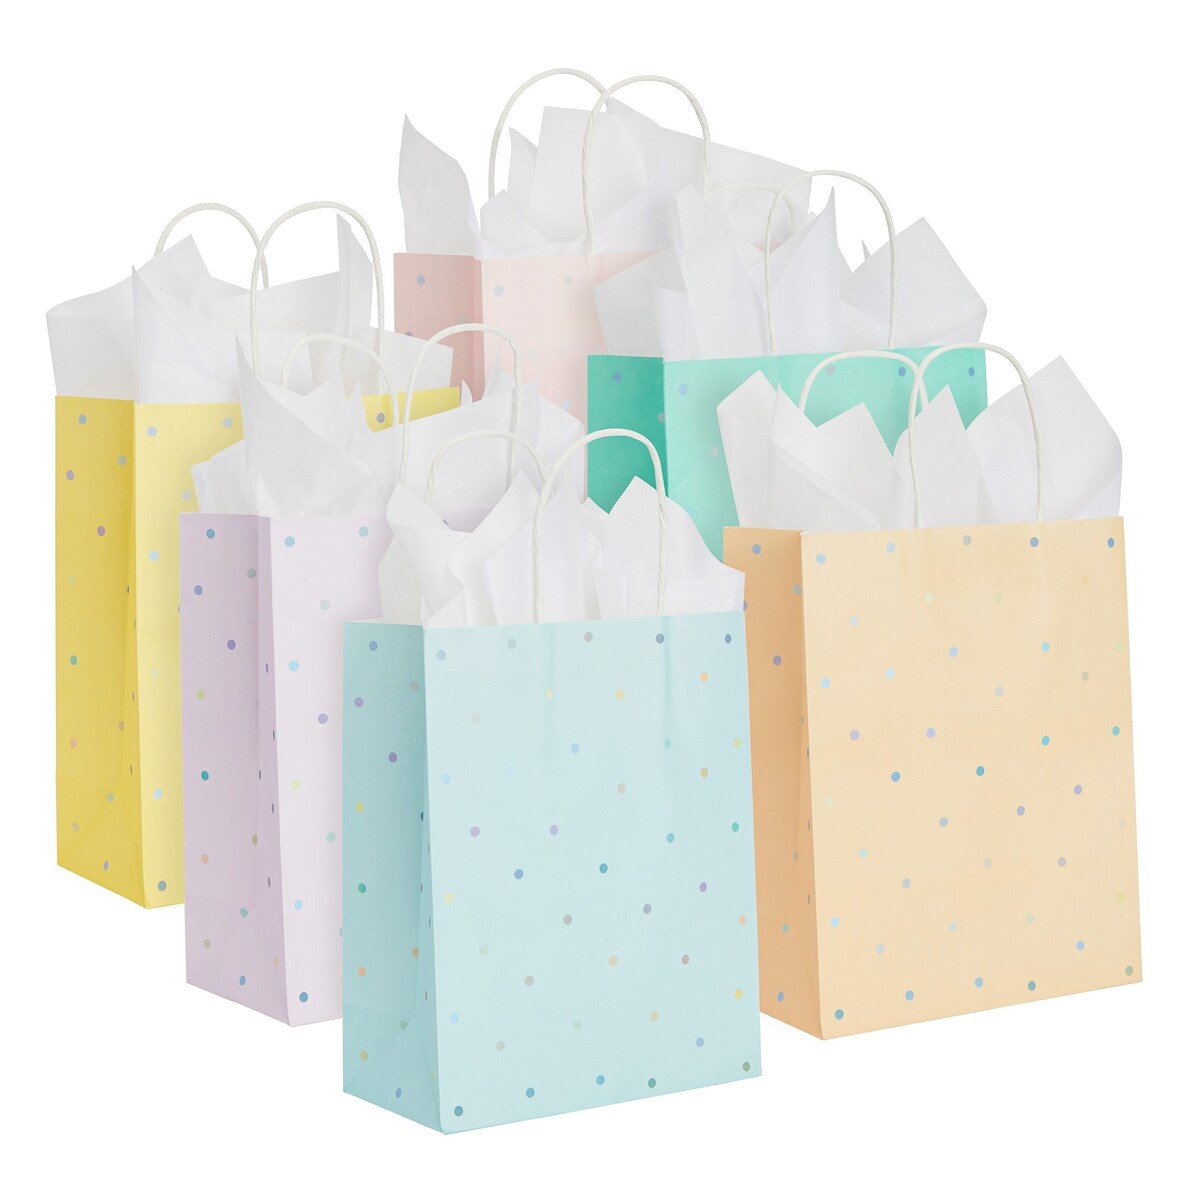 36 Pack Medium Polka Dot Paper Gift Bags with Handles and White Tissue Paper, 6 Pastel Rainbow Colors (10 x 8 x 4 In)